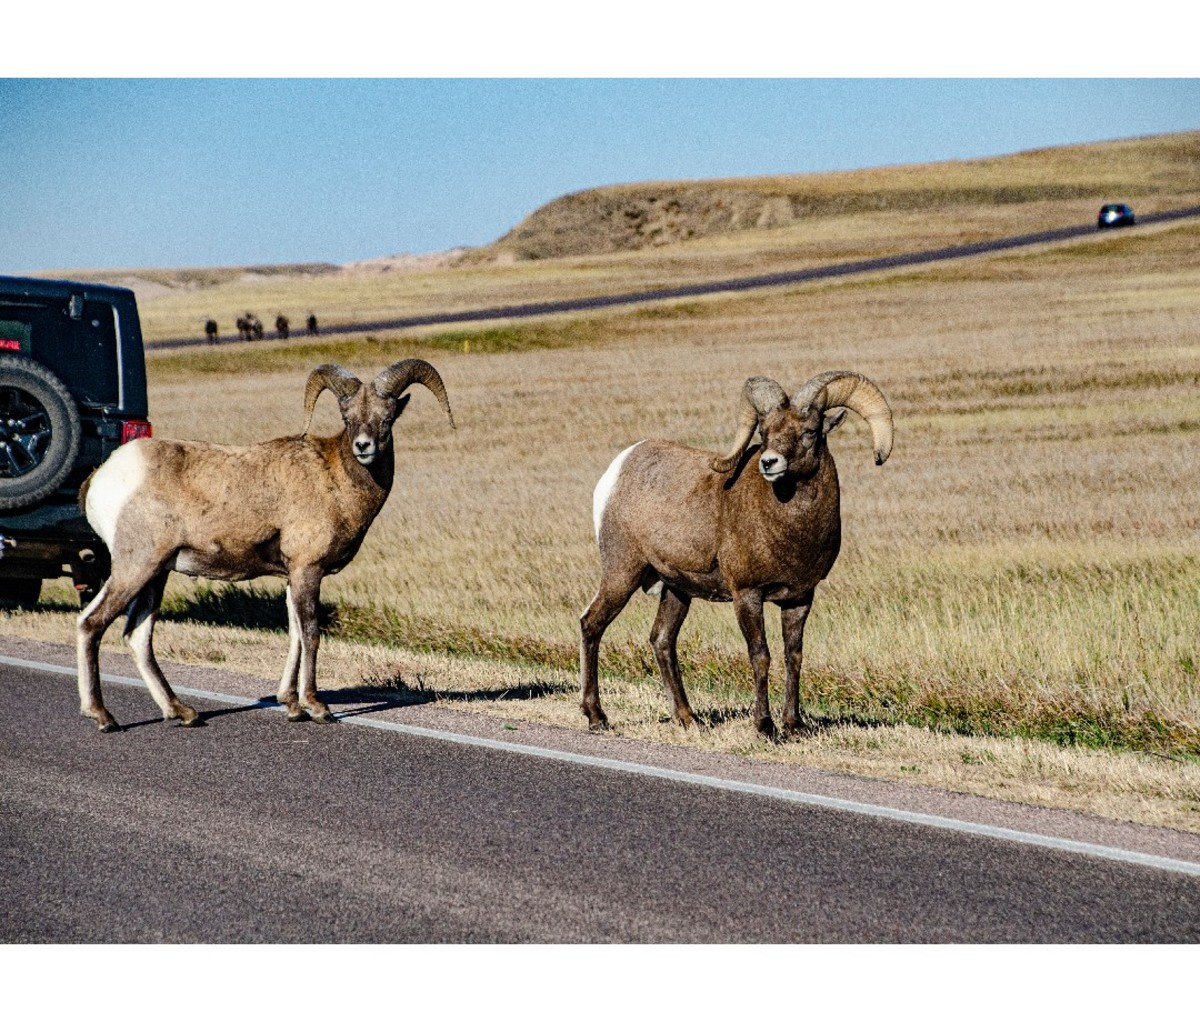 Bighorn sheep by a jeep on the road in Badlands National Park